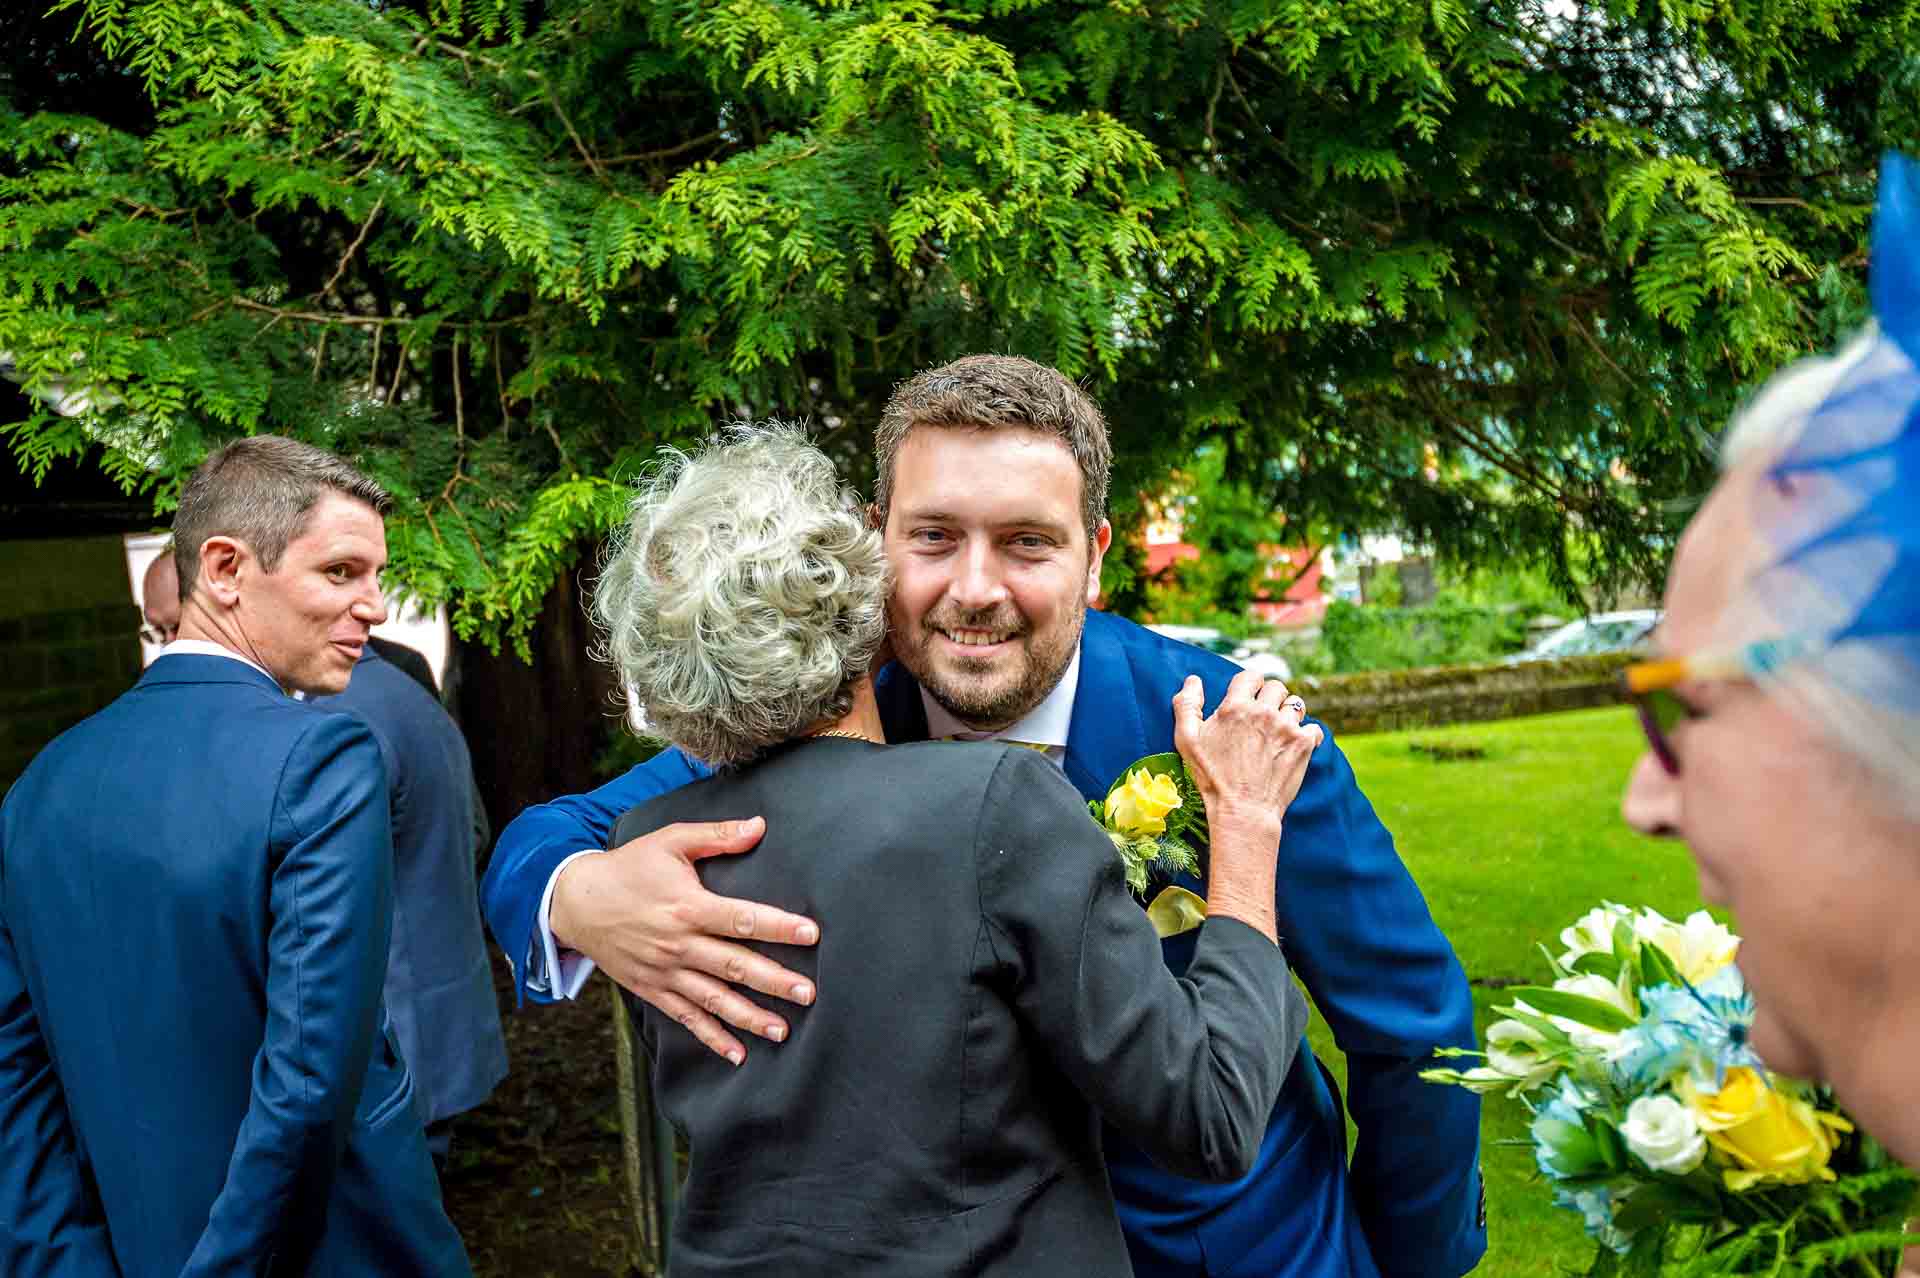 Groom hugging female relative at wedding in Caerphilly, South Wales